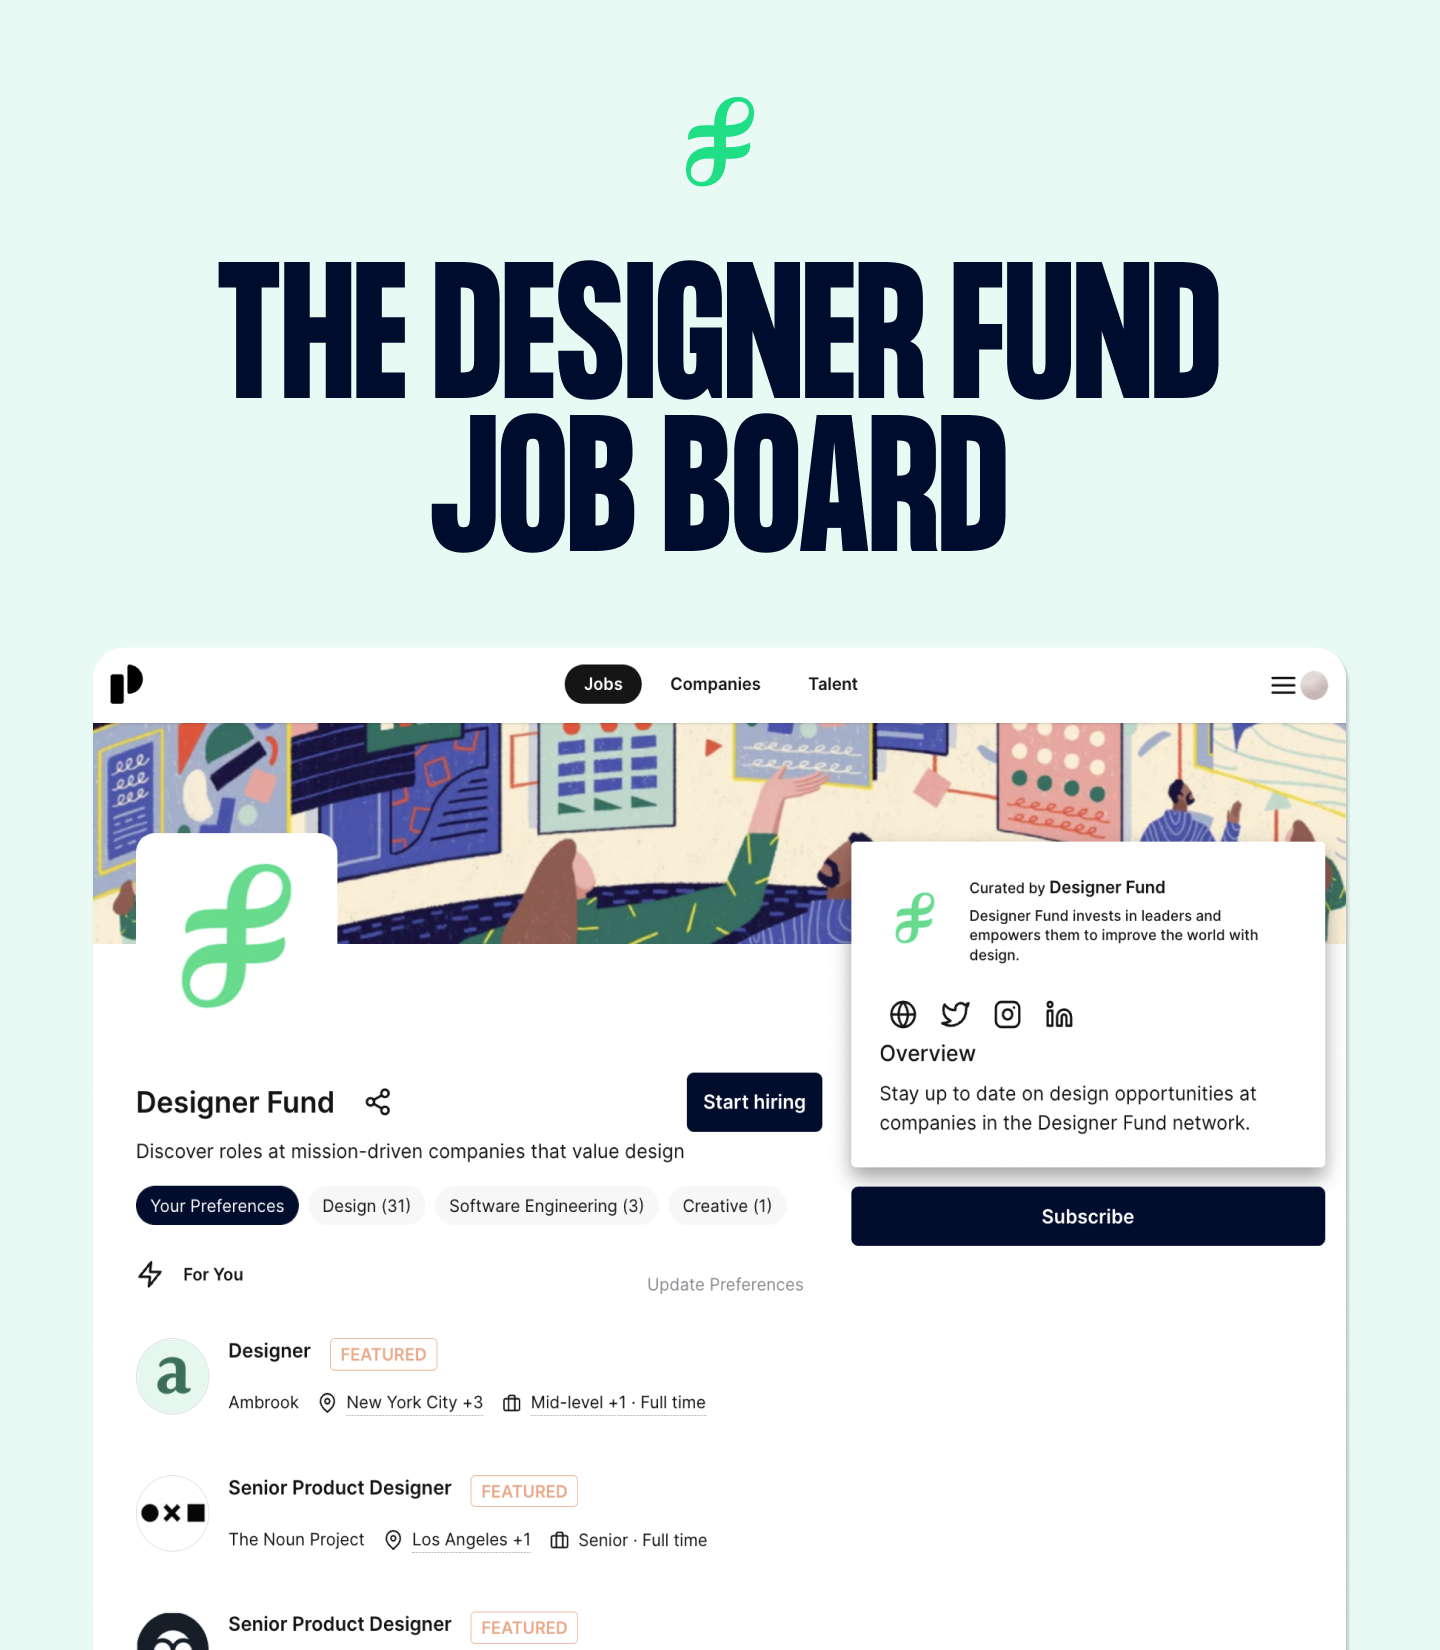 We launched a job board to make it easier for designers to discover great roles at mission-driven startups that value design.